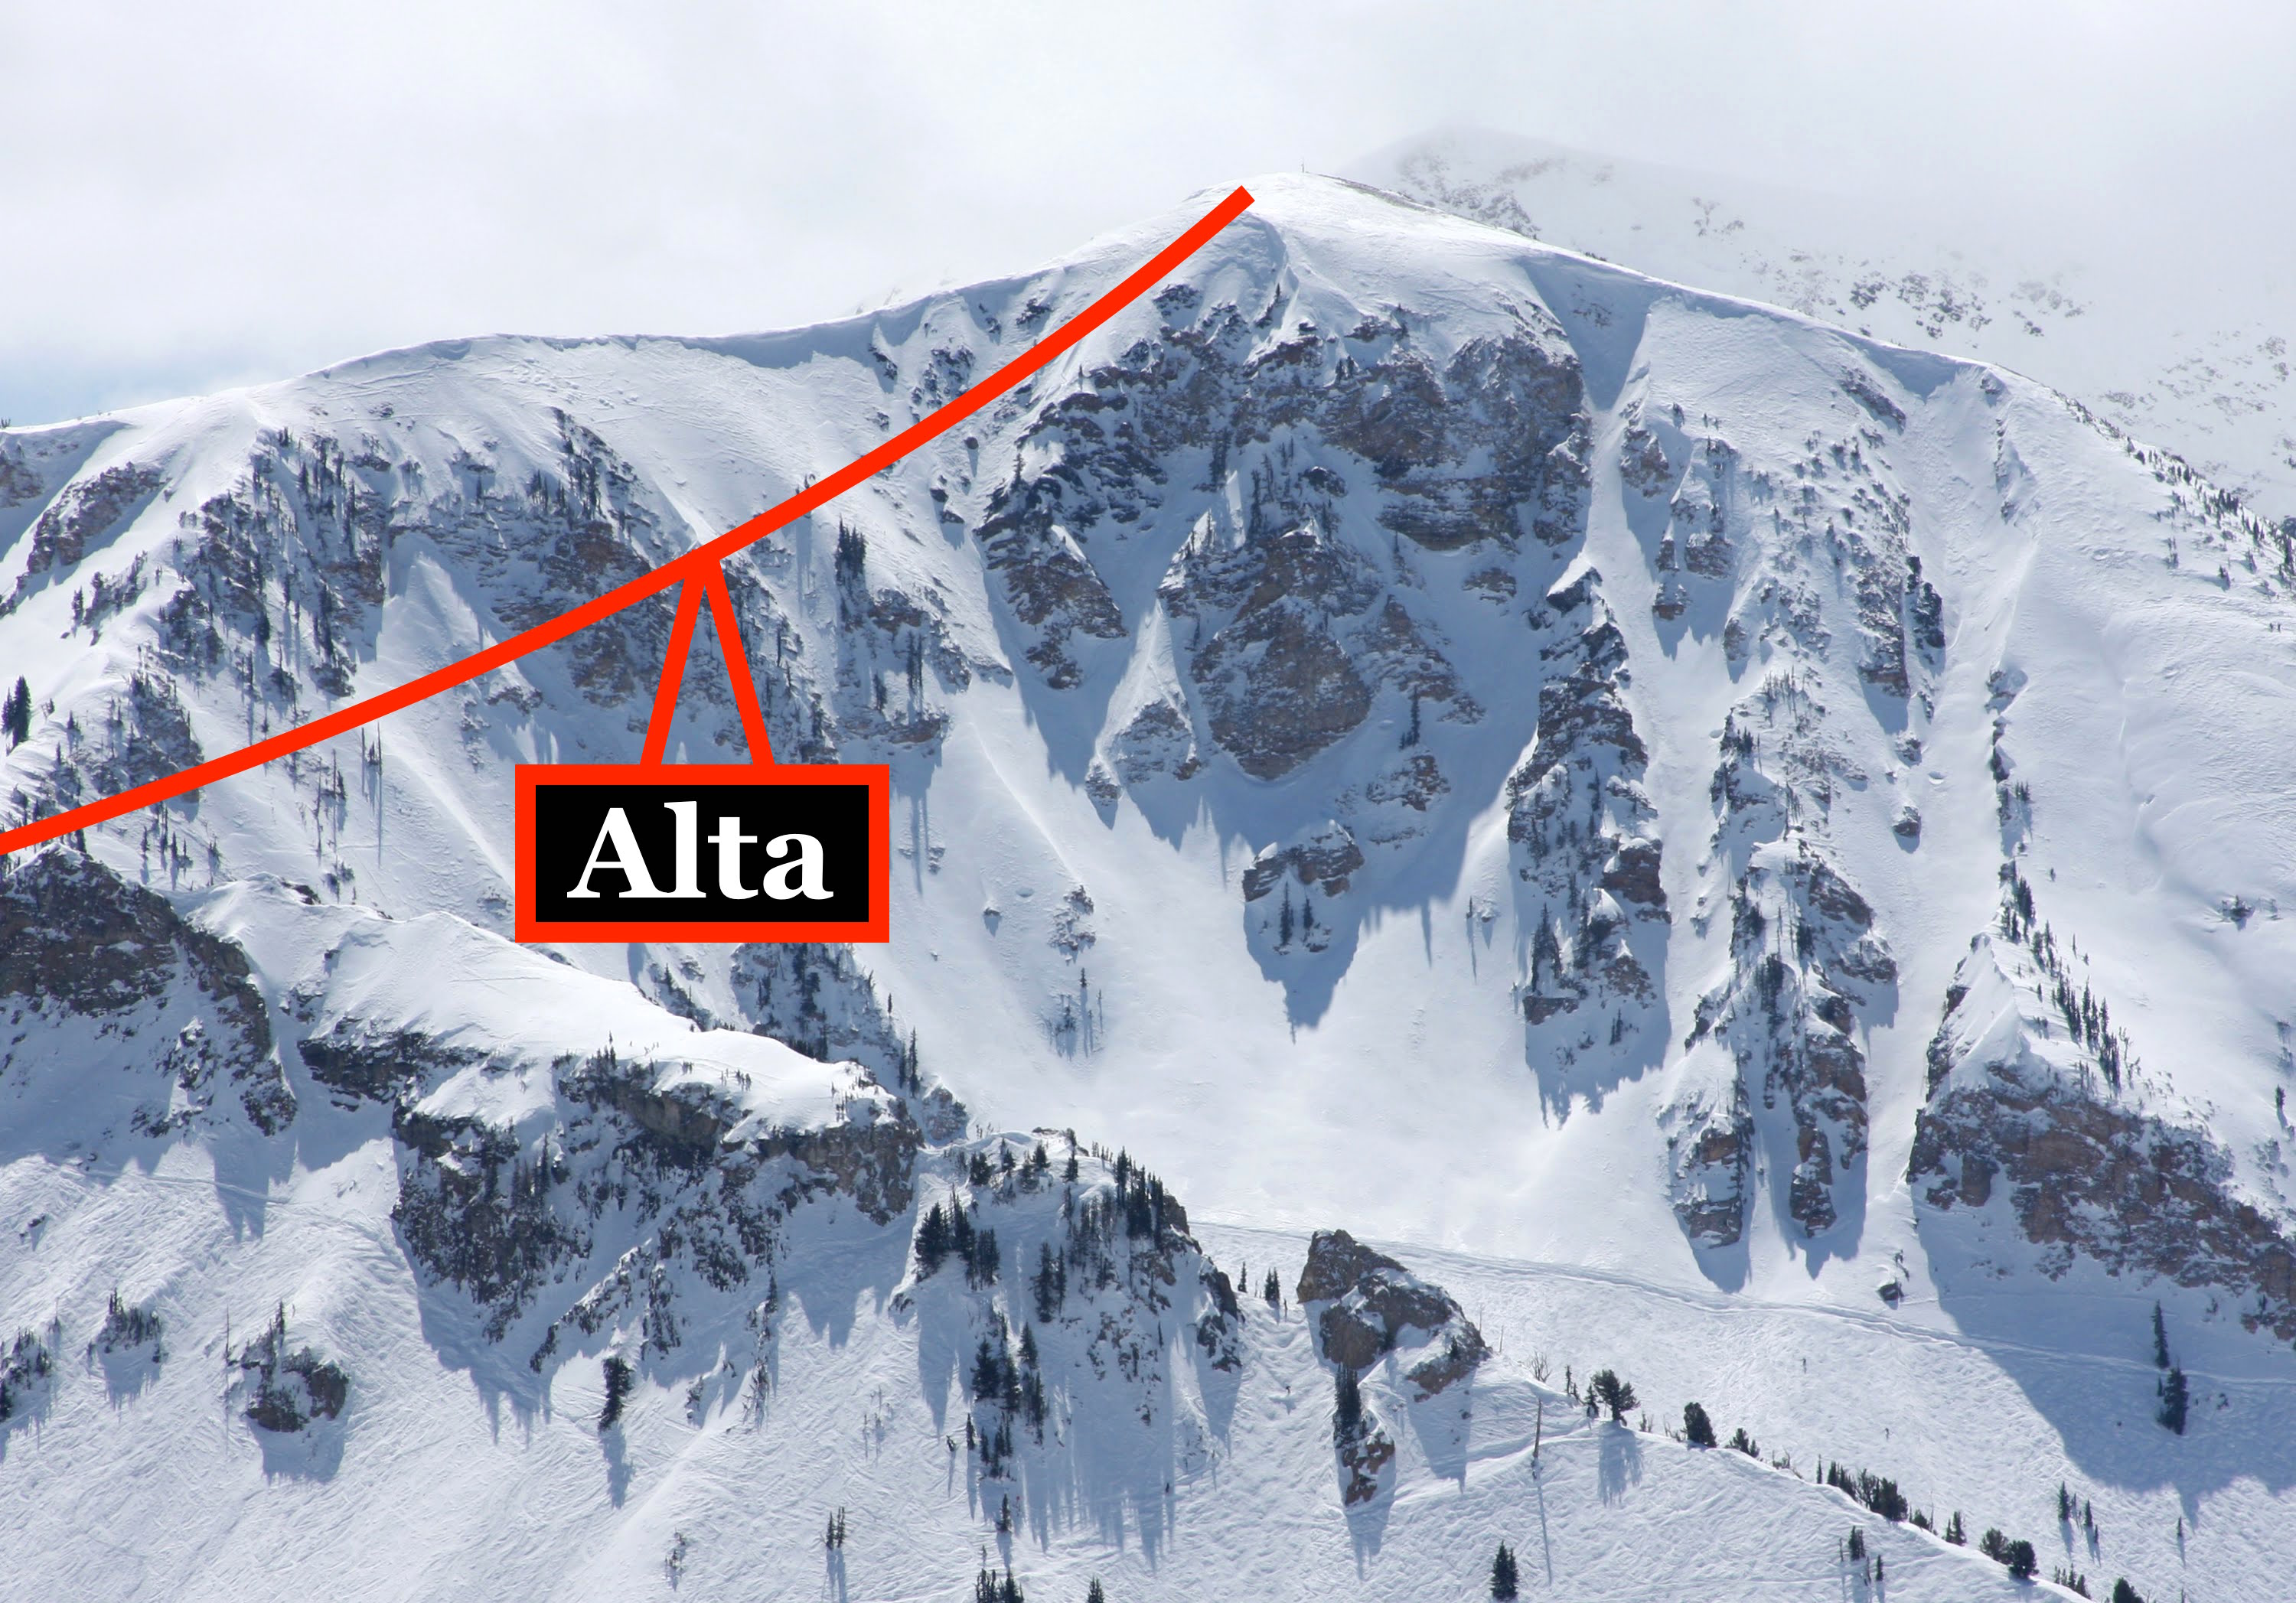 Alta ski area, UT's proposed tram would reach the 11,068' summit of Mt. Baldy.